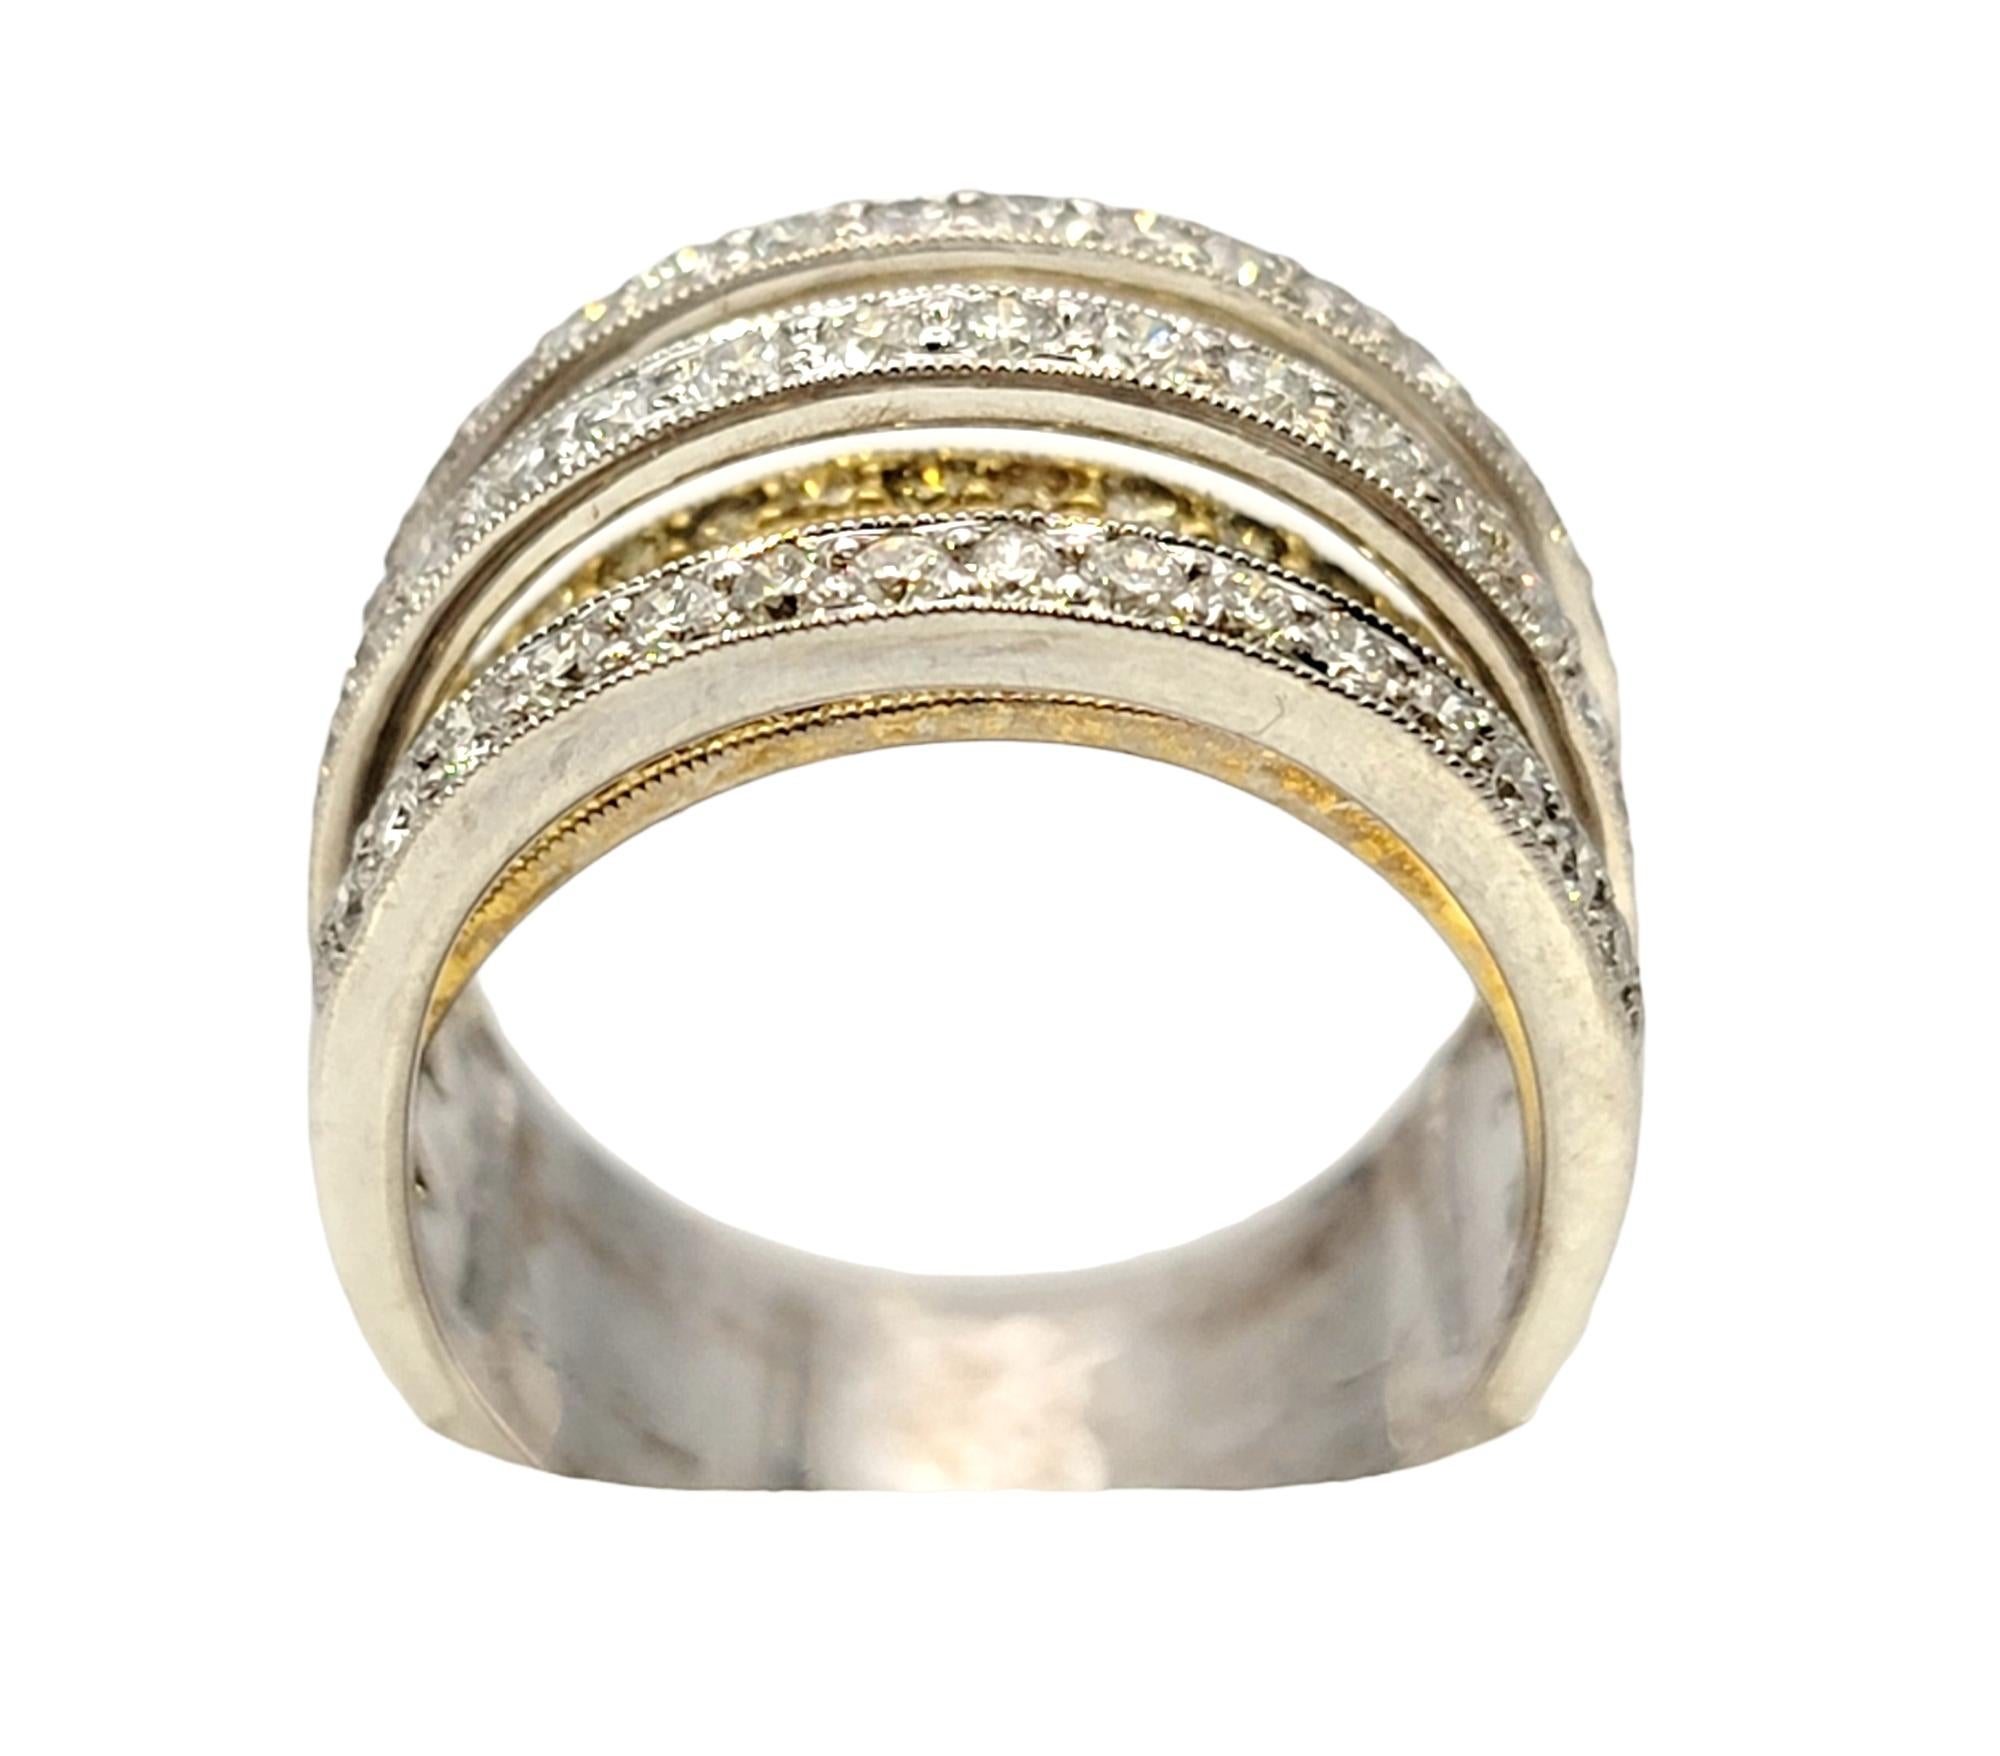 1.42 Carats Total White and Yellow Gold Multi-Row Round Diamond Band Ring For Sale 3